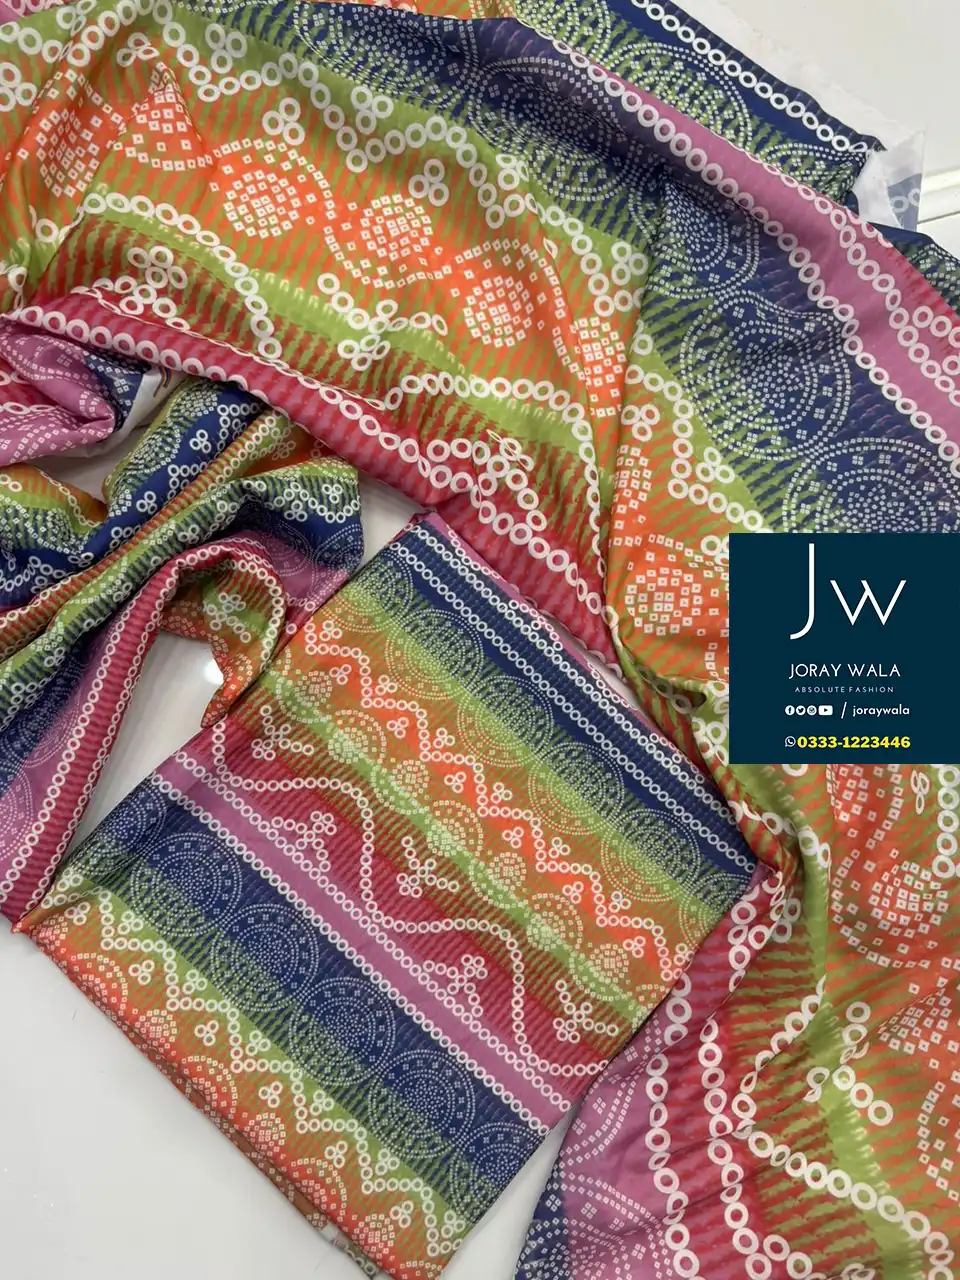 Digital Printed Swiss lawn with silk dupatta D41 available at joraywala with free delivery